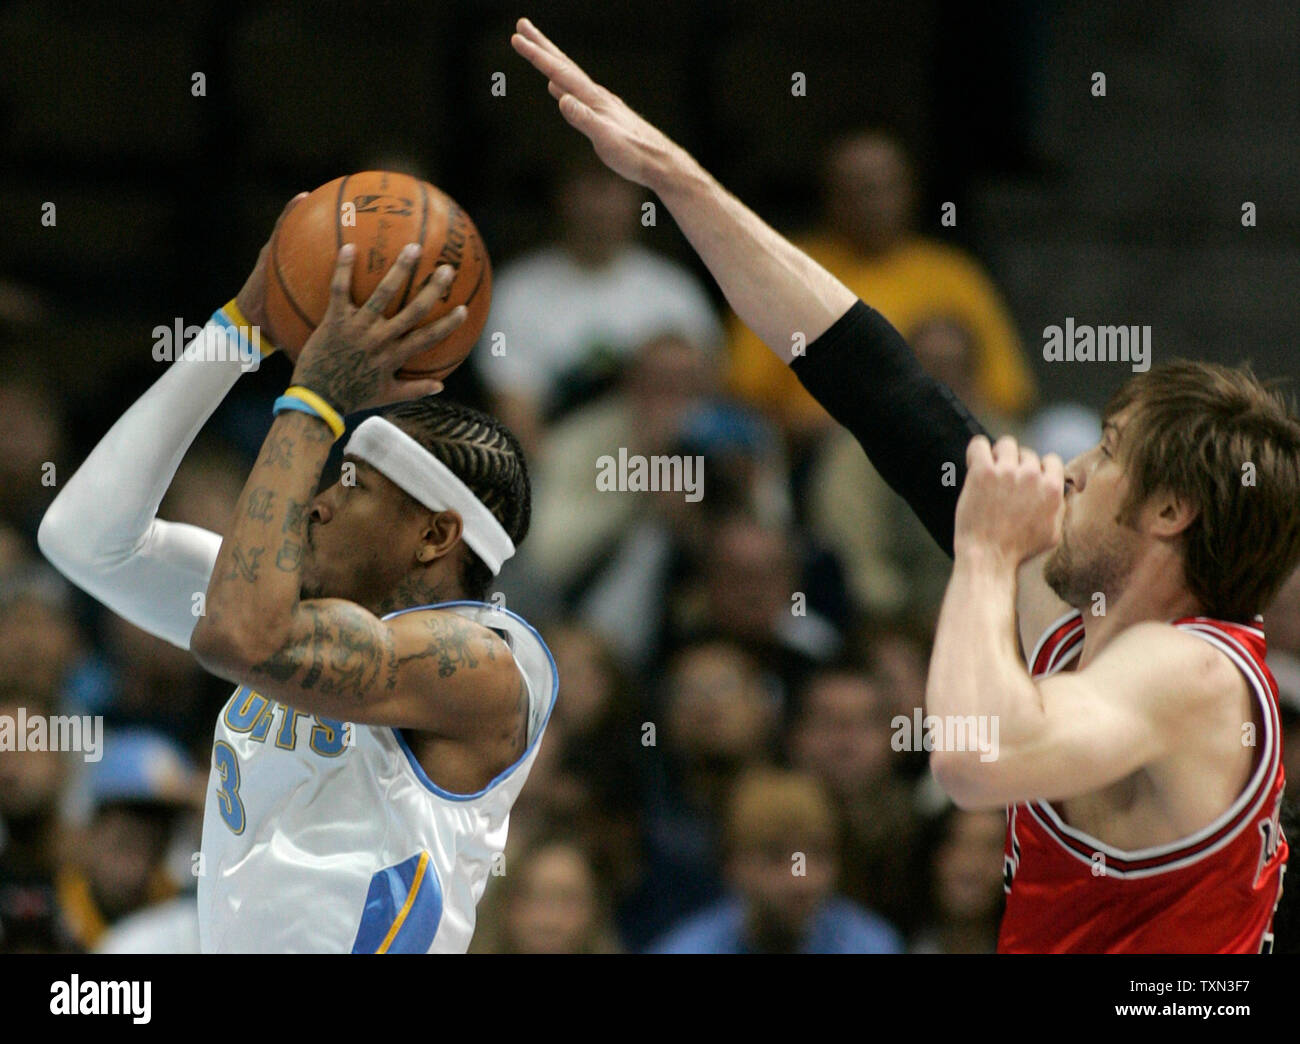 Chicago Bulls forward Andres Nocioni (R) of Argentina attempts to block shot by Denver Nuggets guard Allen Iverson during the first quarter at the Pepsi Center in Denver on November 20, 2007.   (UPI Photo/Gary C. Caskey) Stock Photo